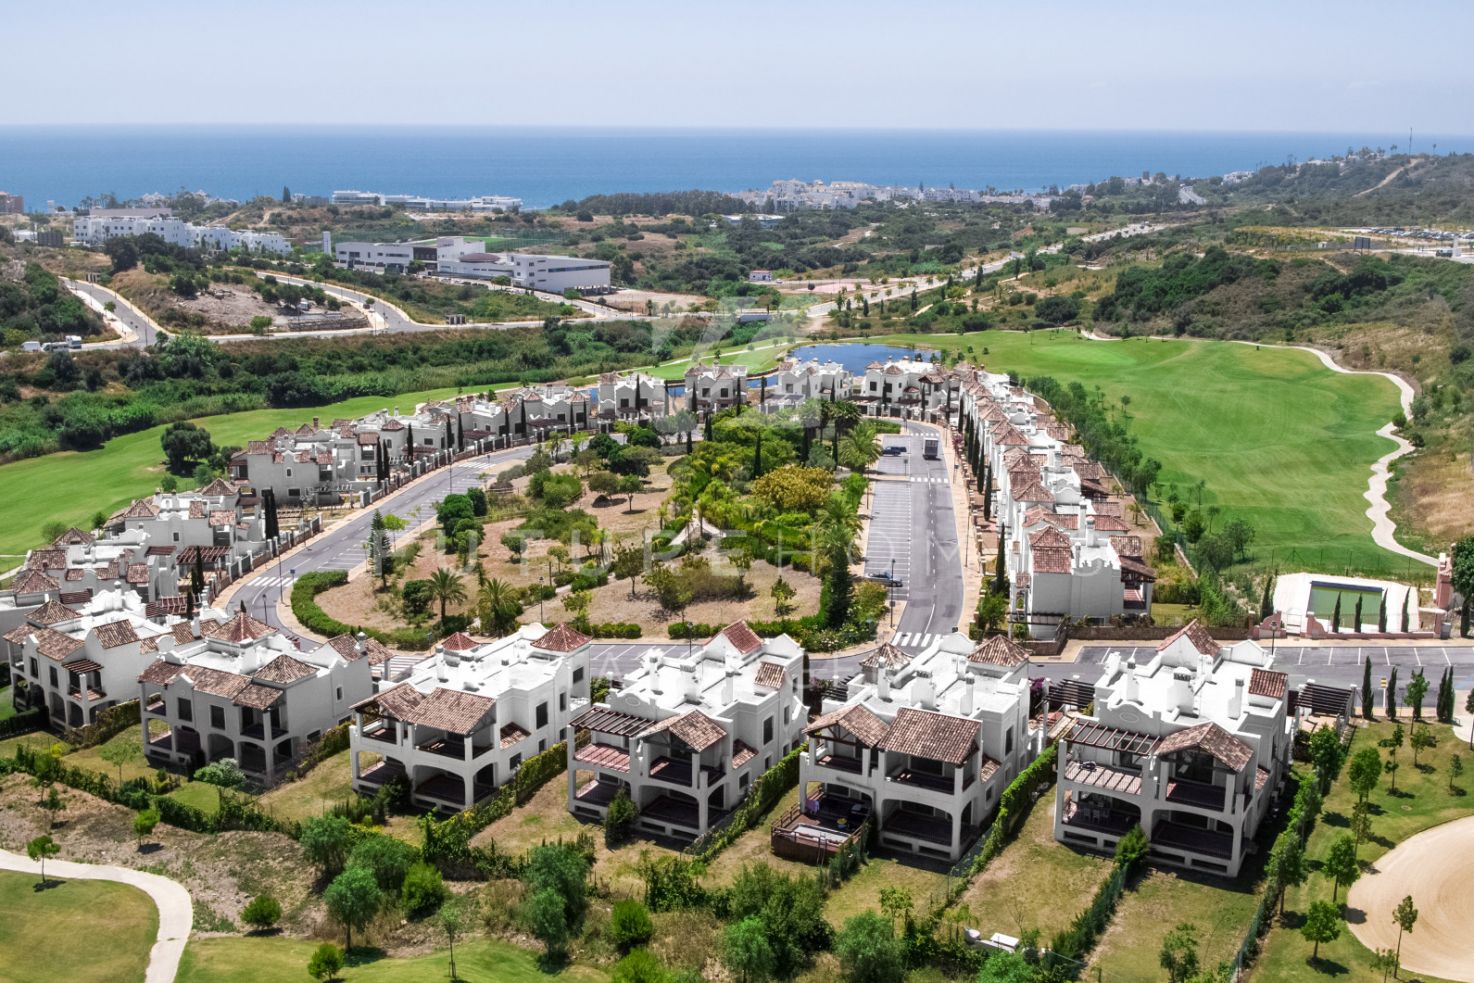 Detached villas for sale in Estepona just 1km from the beach and boardwalk 